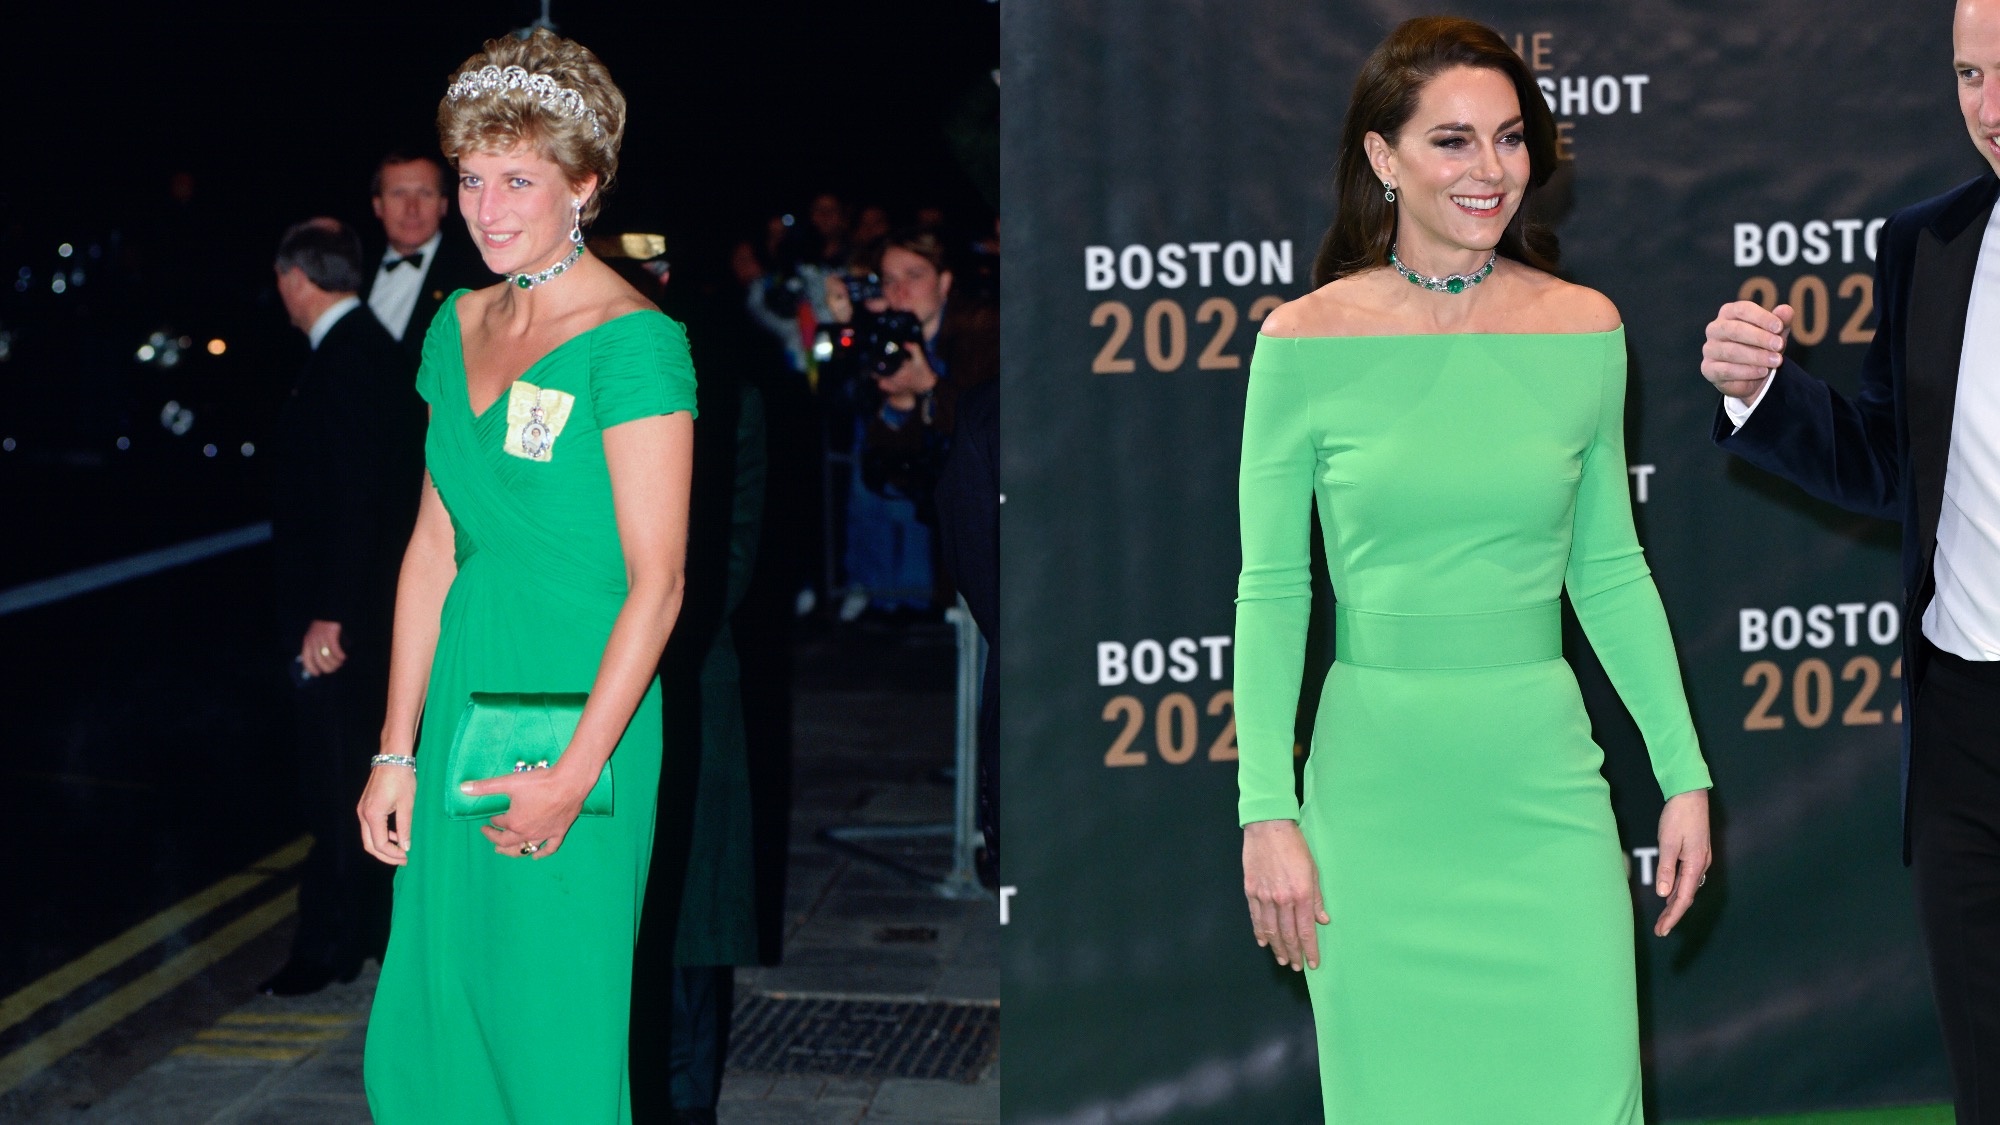 (L) Princess Diana at a 1993 banquet. (R) Kate Middleton attends The Earthshot Prize 2022 in Boston, Massachusetts.